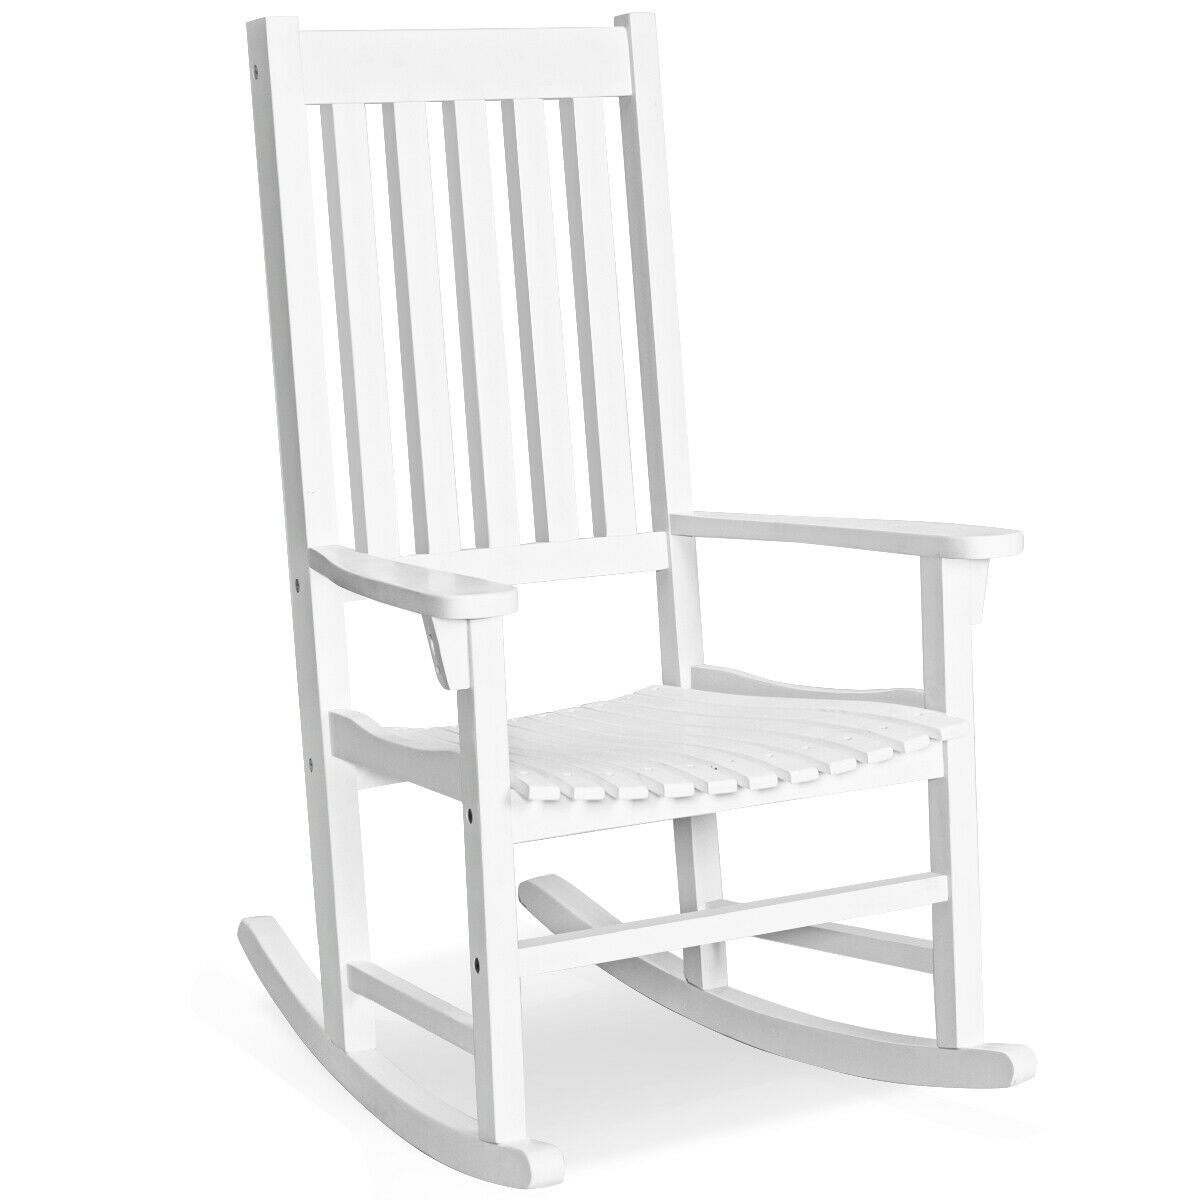 Gymax Wooden Rocking Chair Porch Rocker High Back Garden Seat For Indoor Outdoor White - image 1 of 10